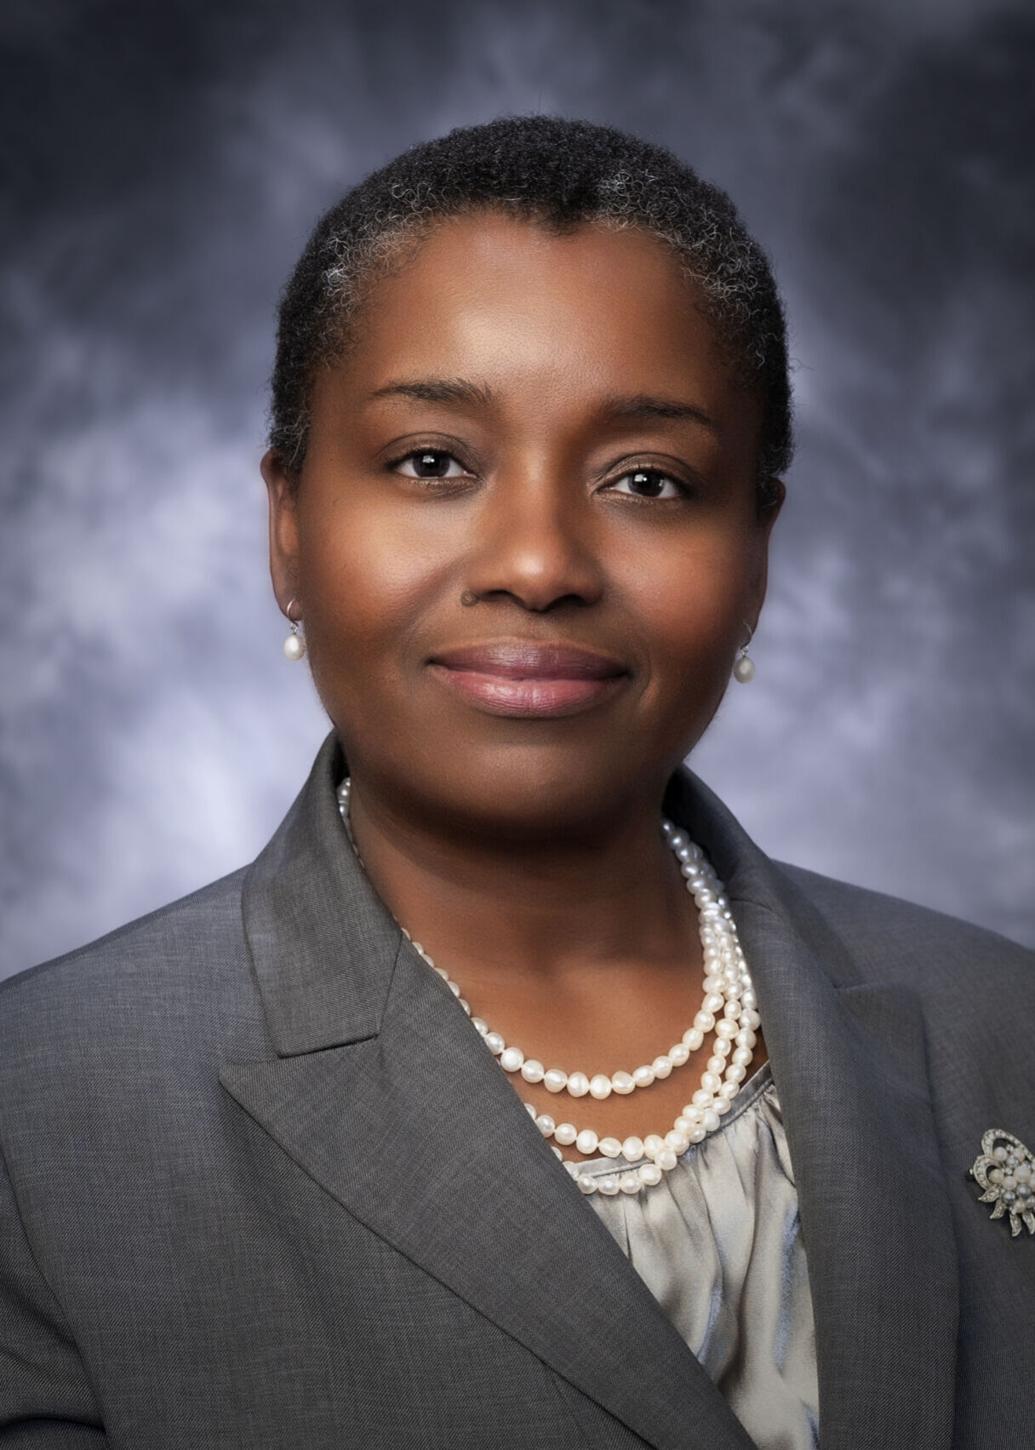 Full Story Dr Denise Johnson Picked To Run Pa Department Of Health